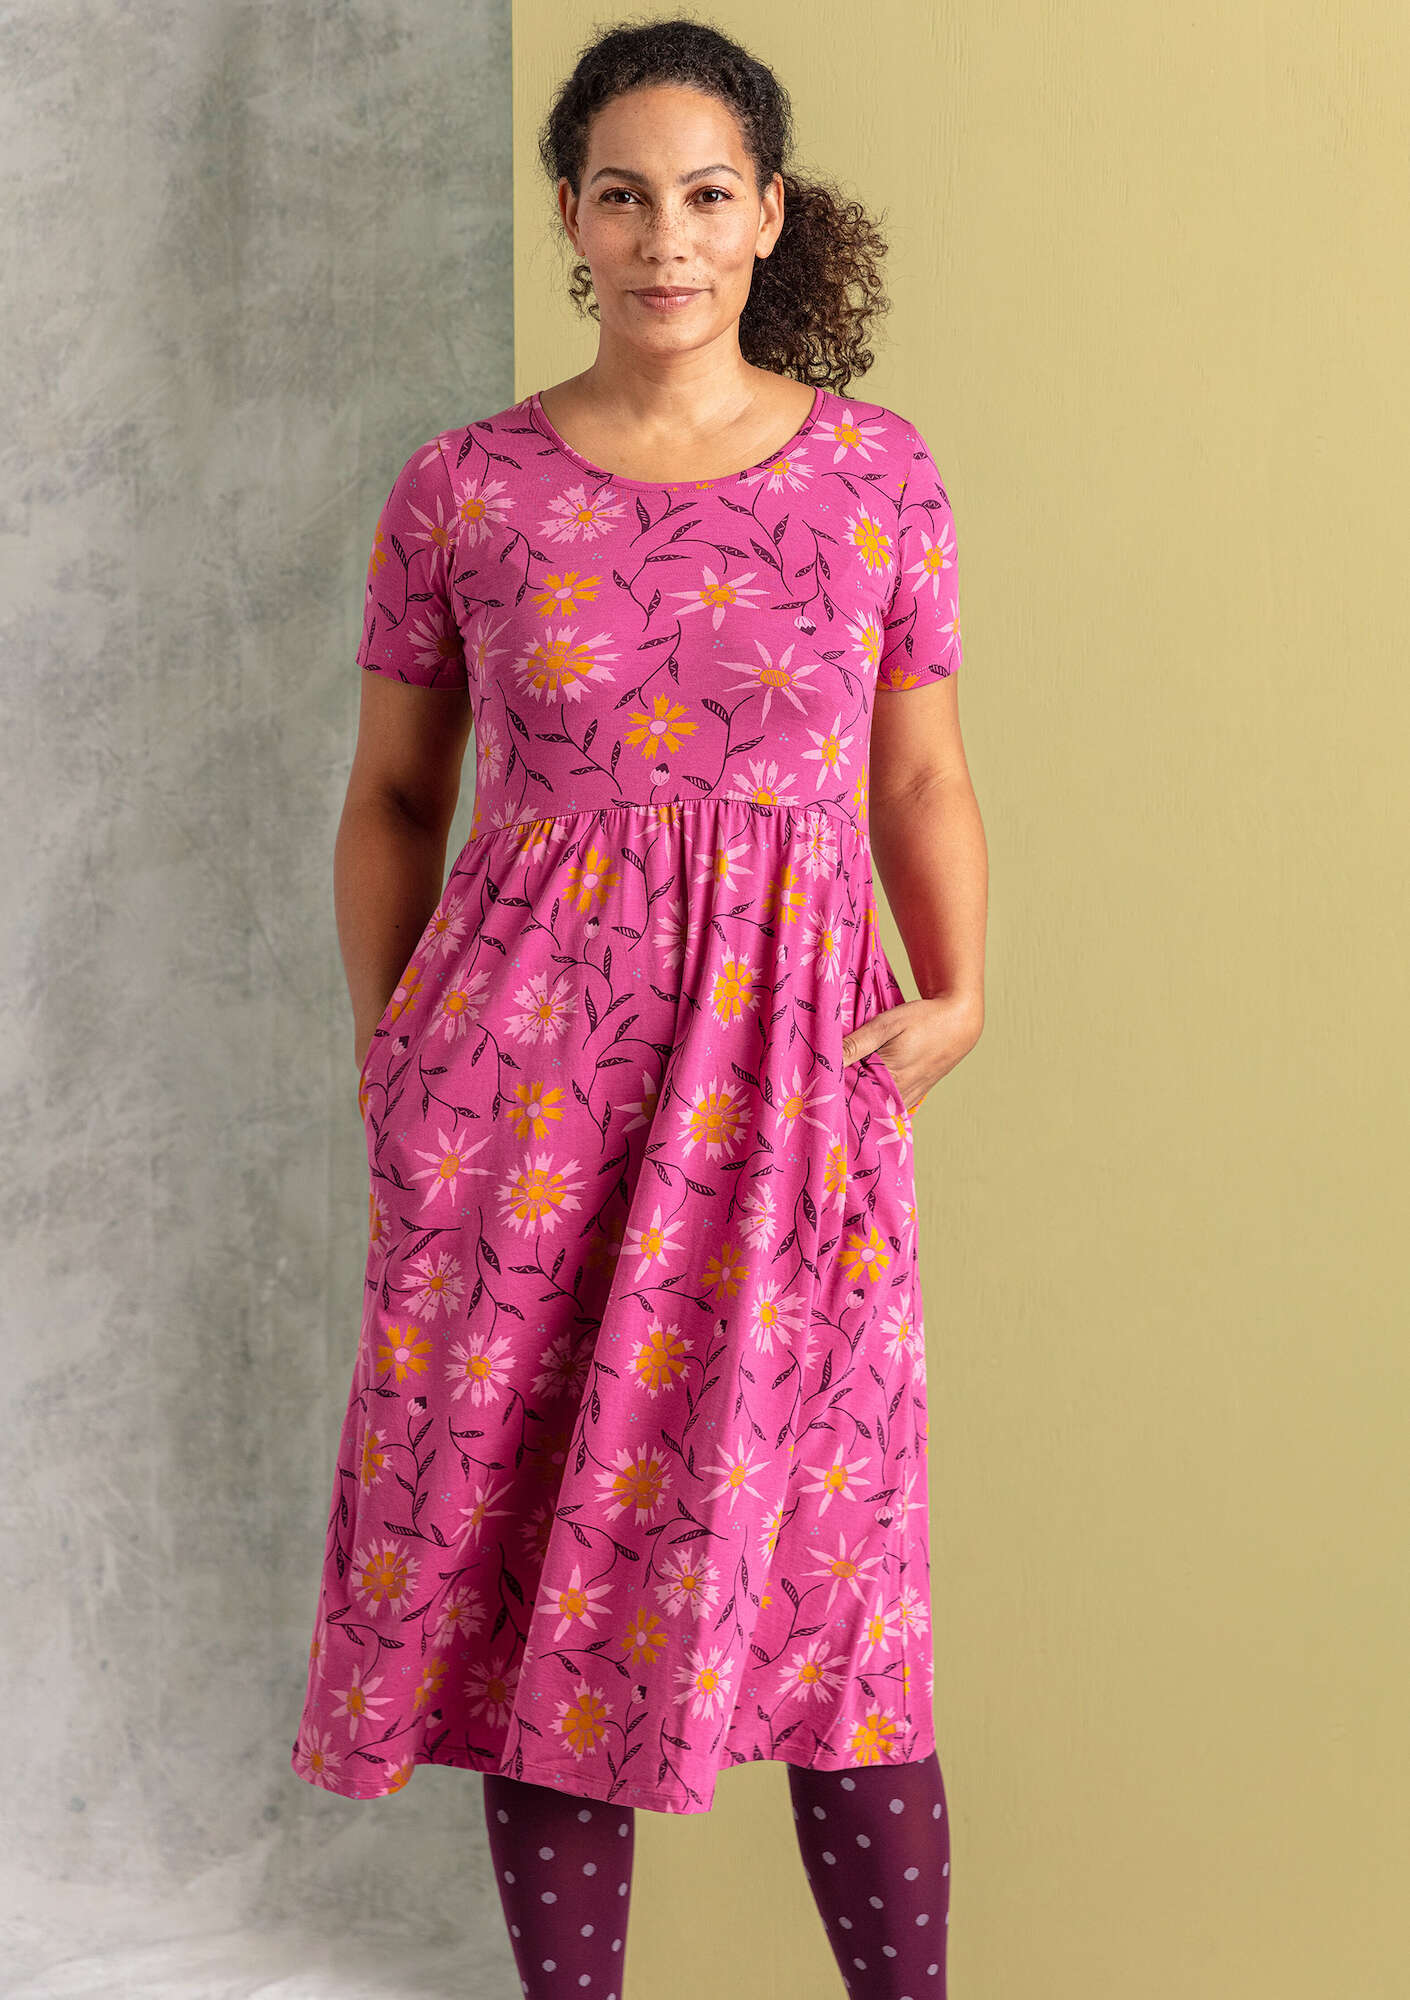 “Isolde” jersey dress in organic cotton/modal pink orchid/patterned